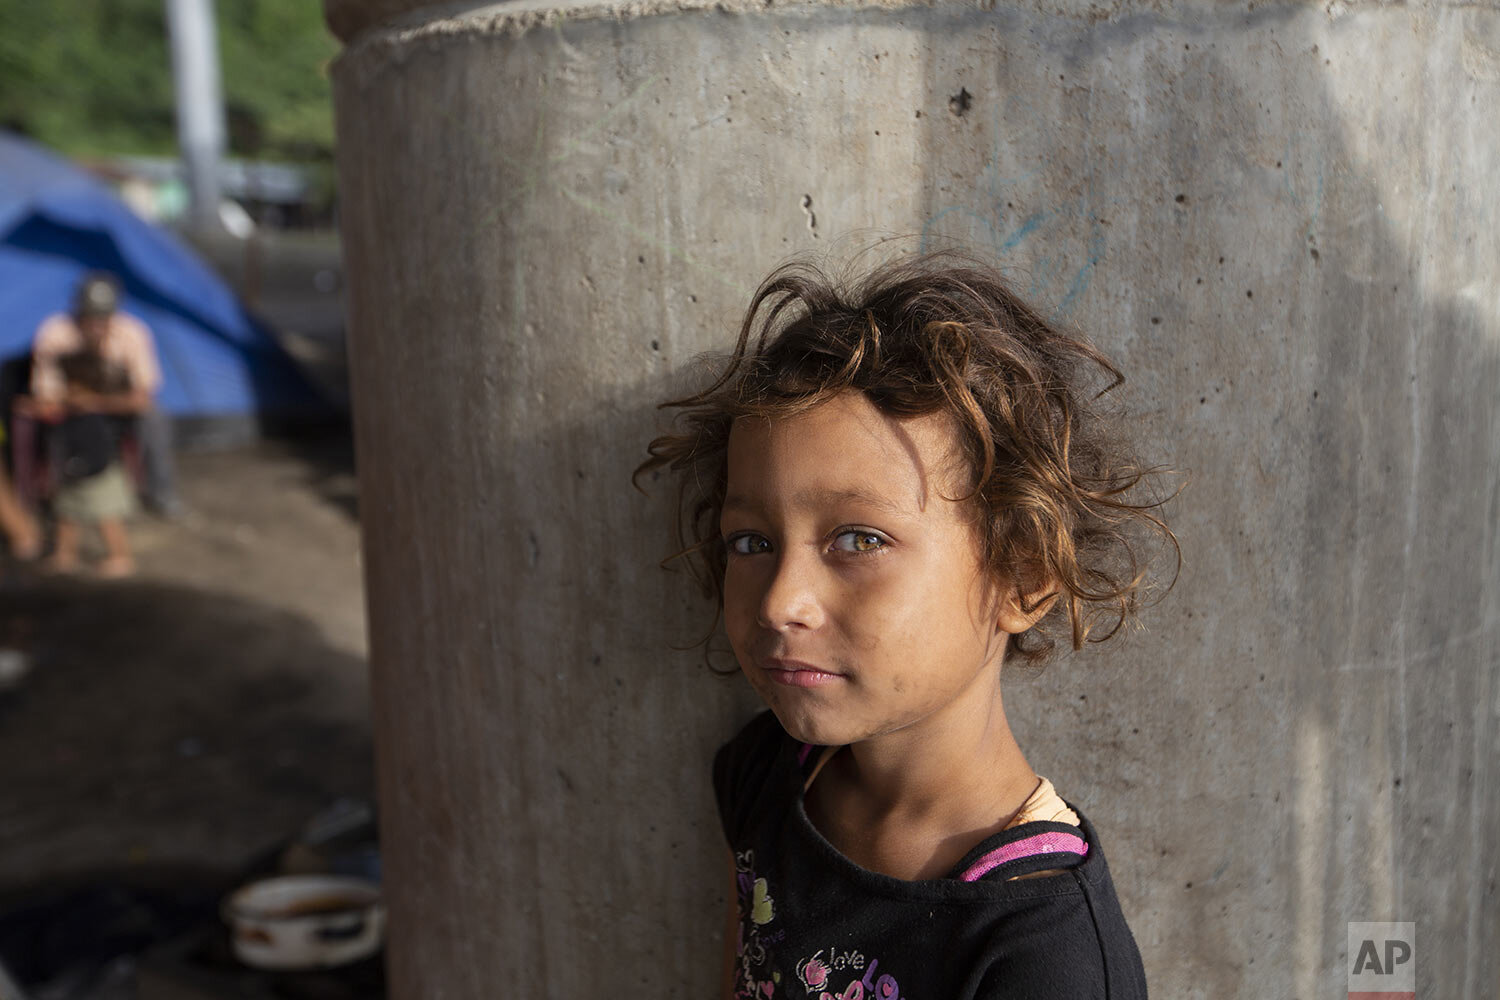  Katerine waits for breakfast cooked by her family under a bridge on the outskirts of San Pedro Sula, Honduras, Jan. 11, 2021, in this photo published in Feb. The 9-year-old has lived under this bridge with her family since they lost their home to la